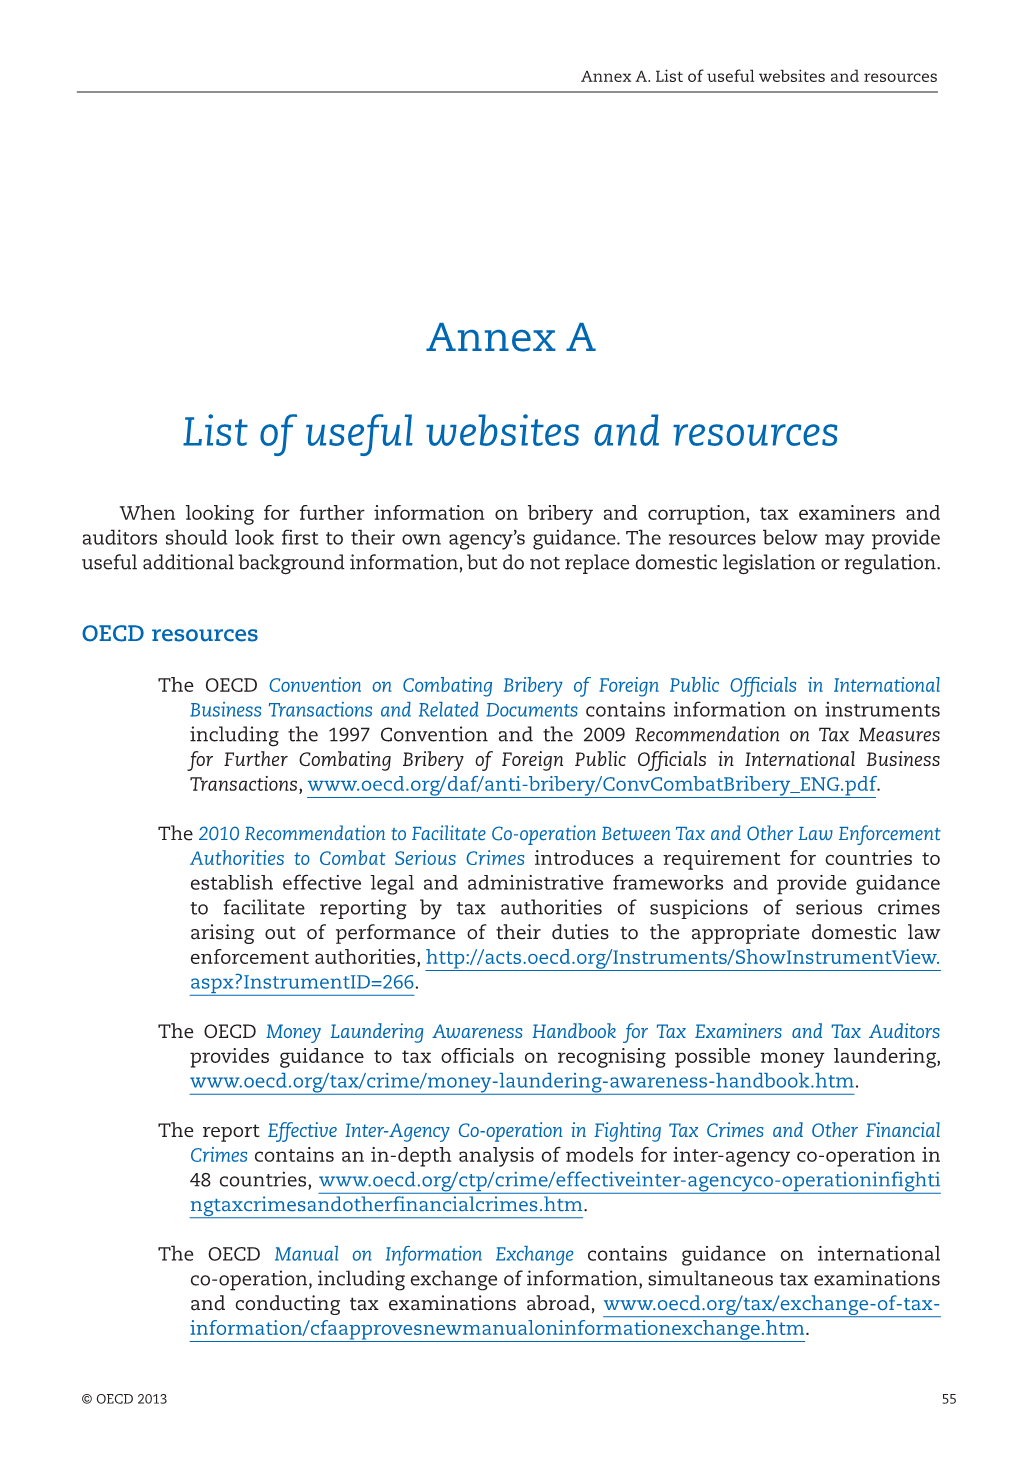 Annex a List of Useful Websites and Resources